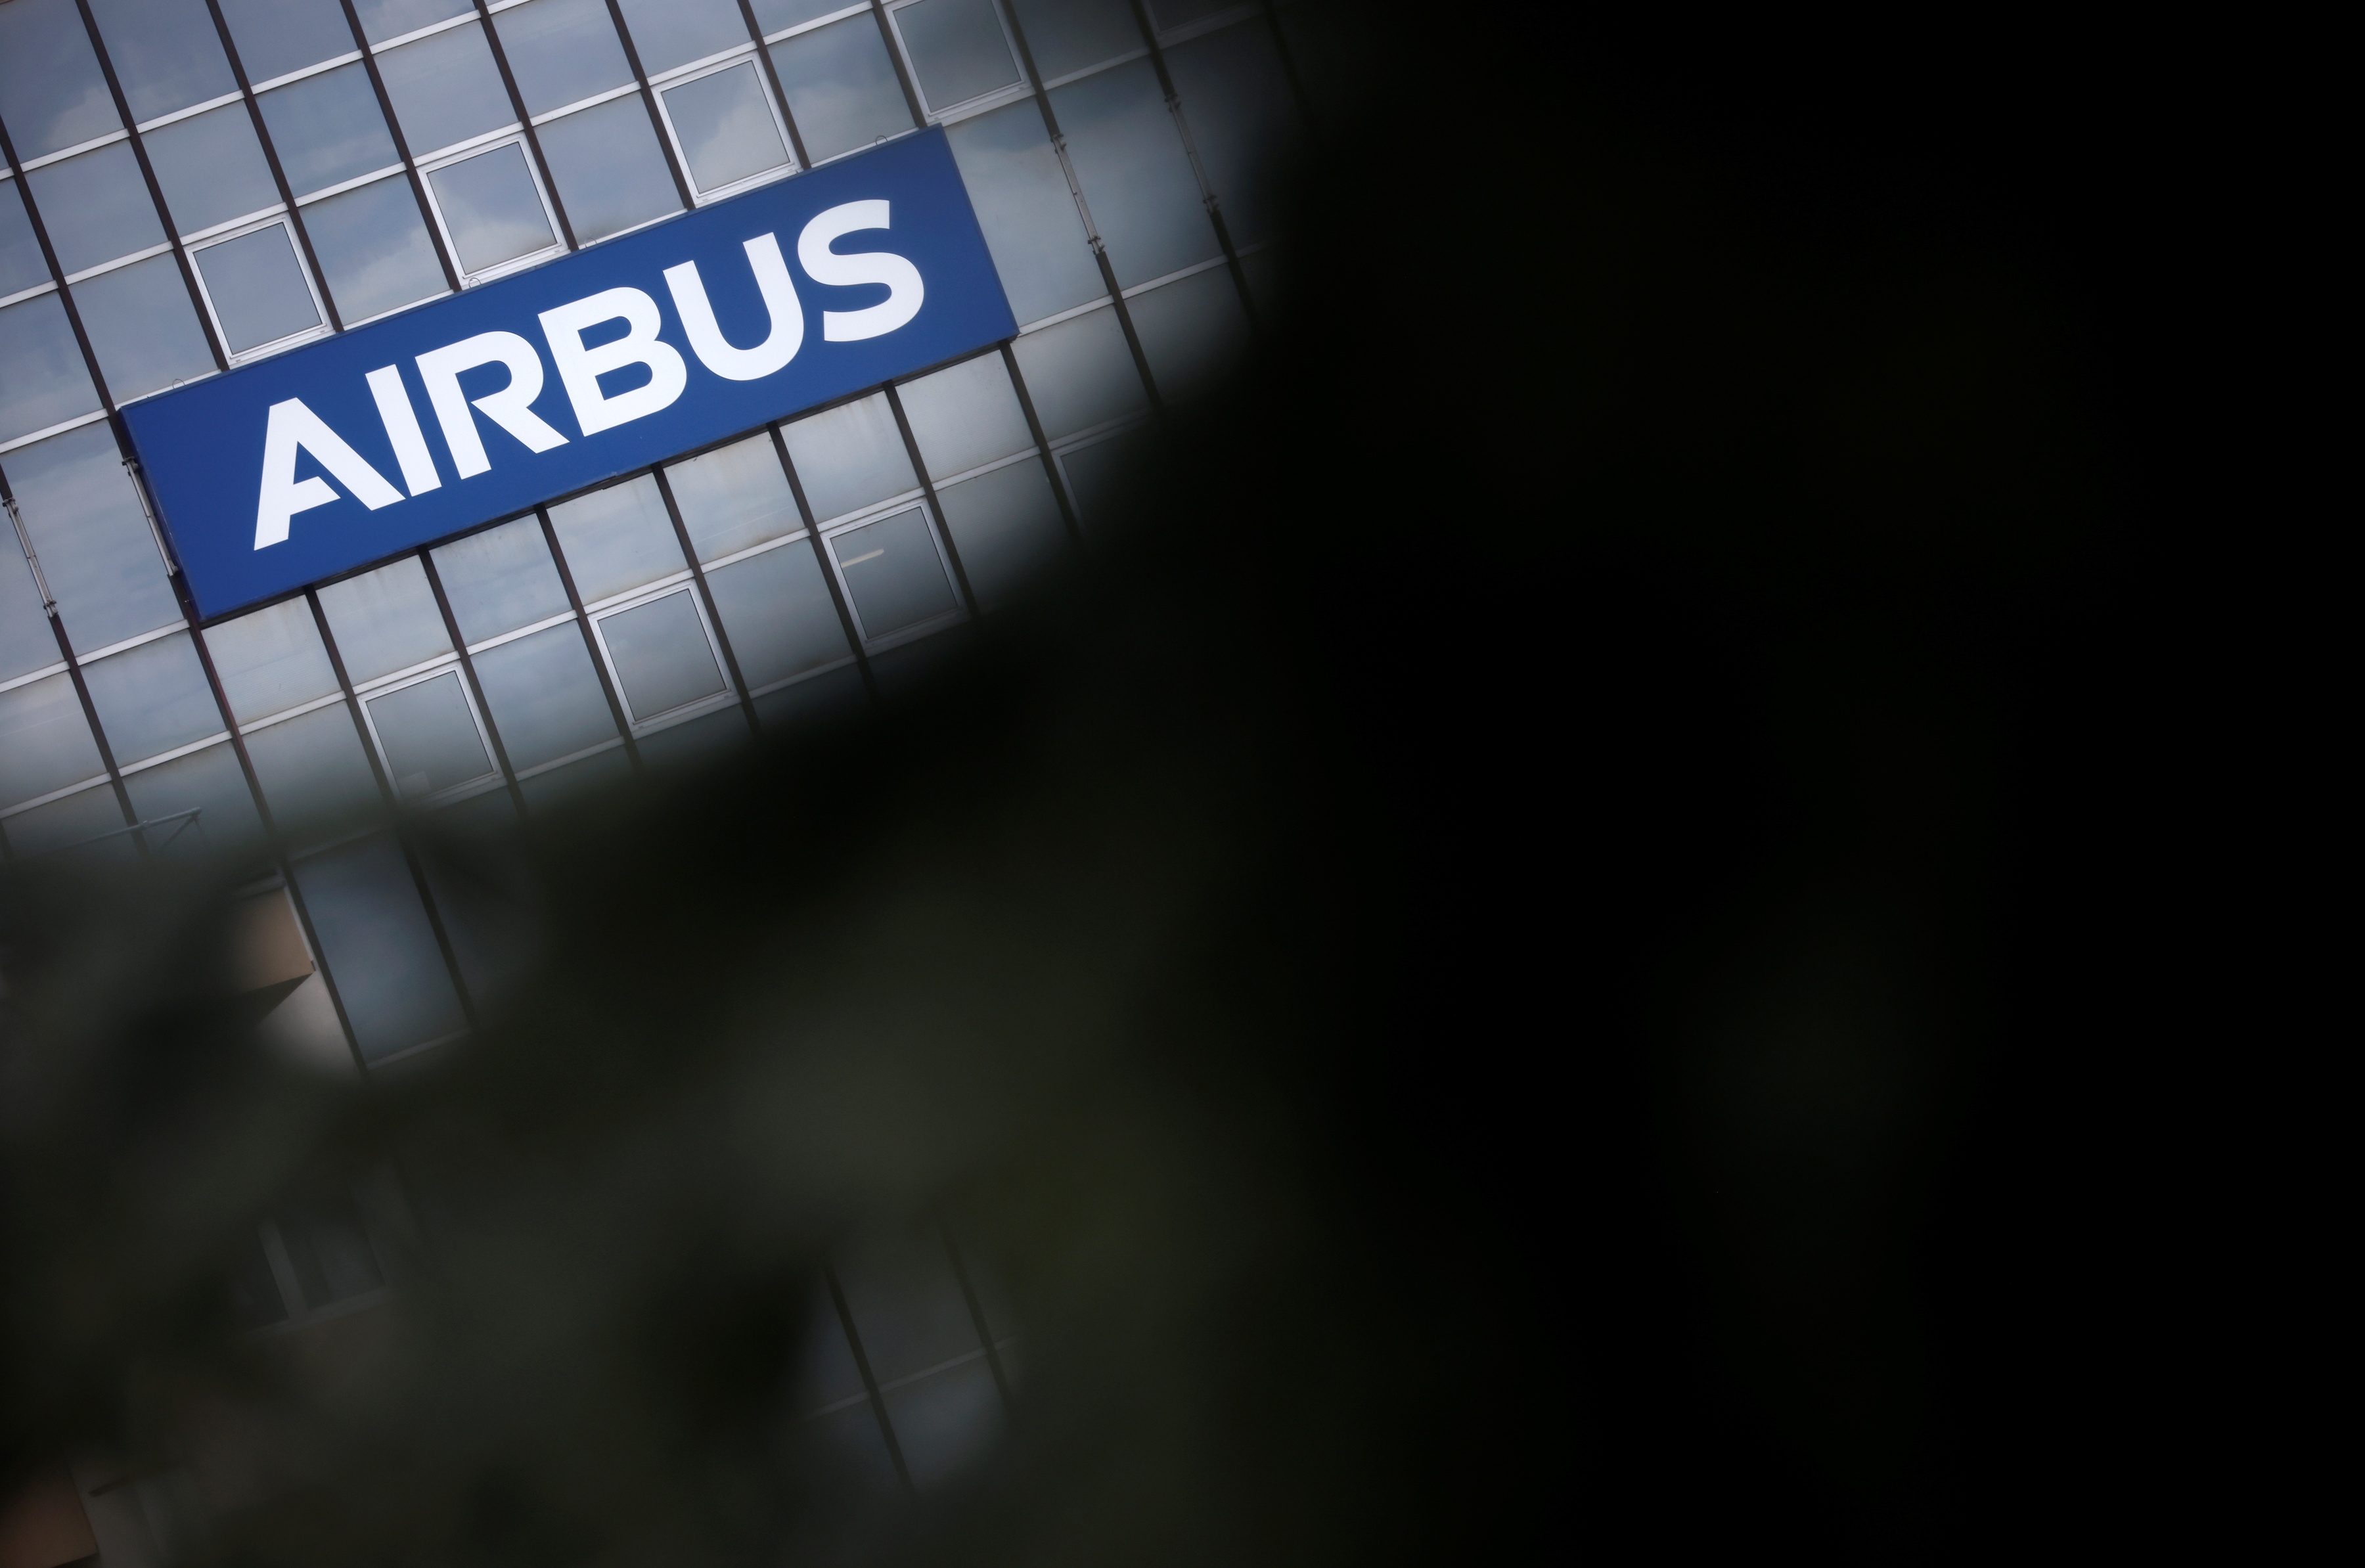 Airbus sees medium-haul air travel recovery by 2023